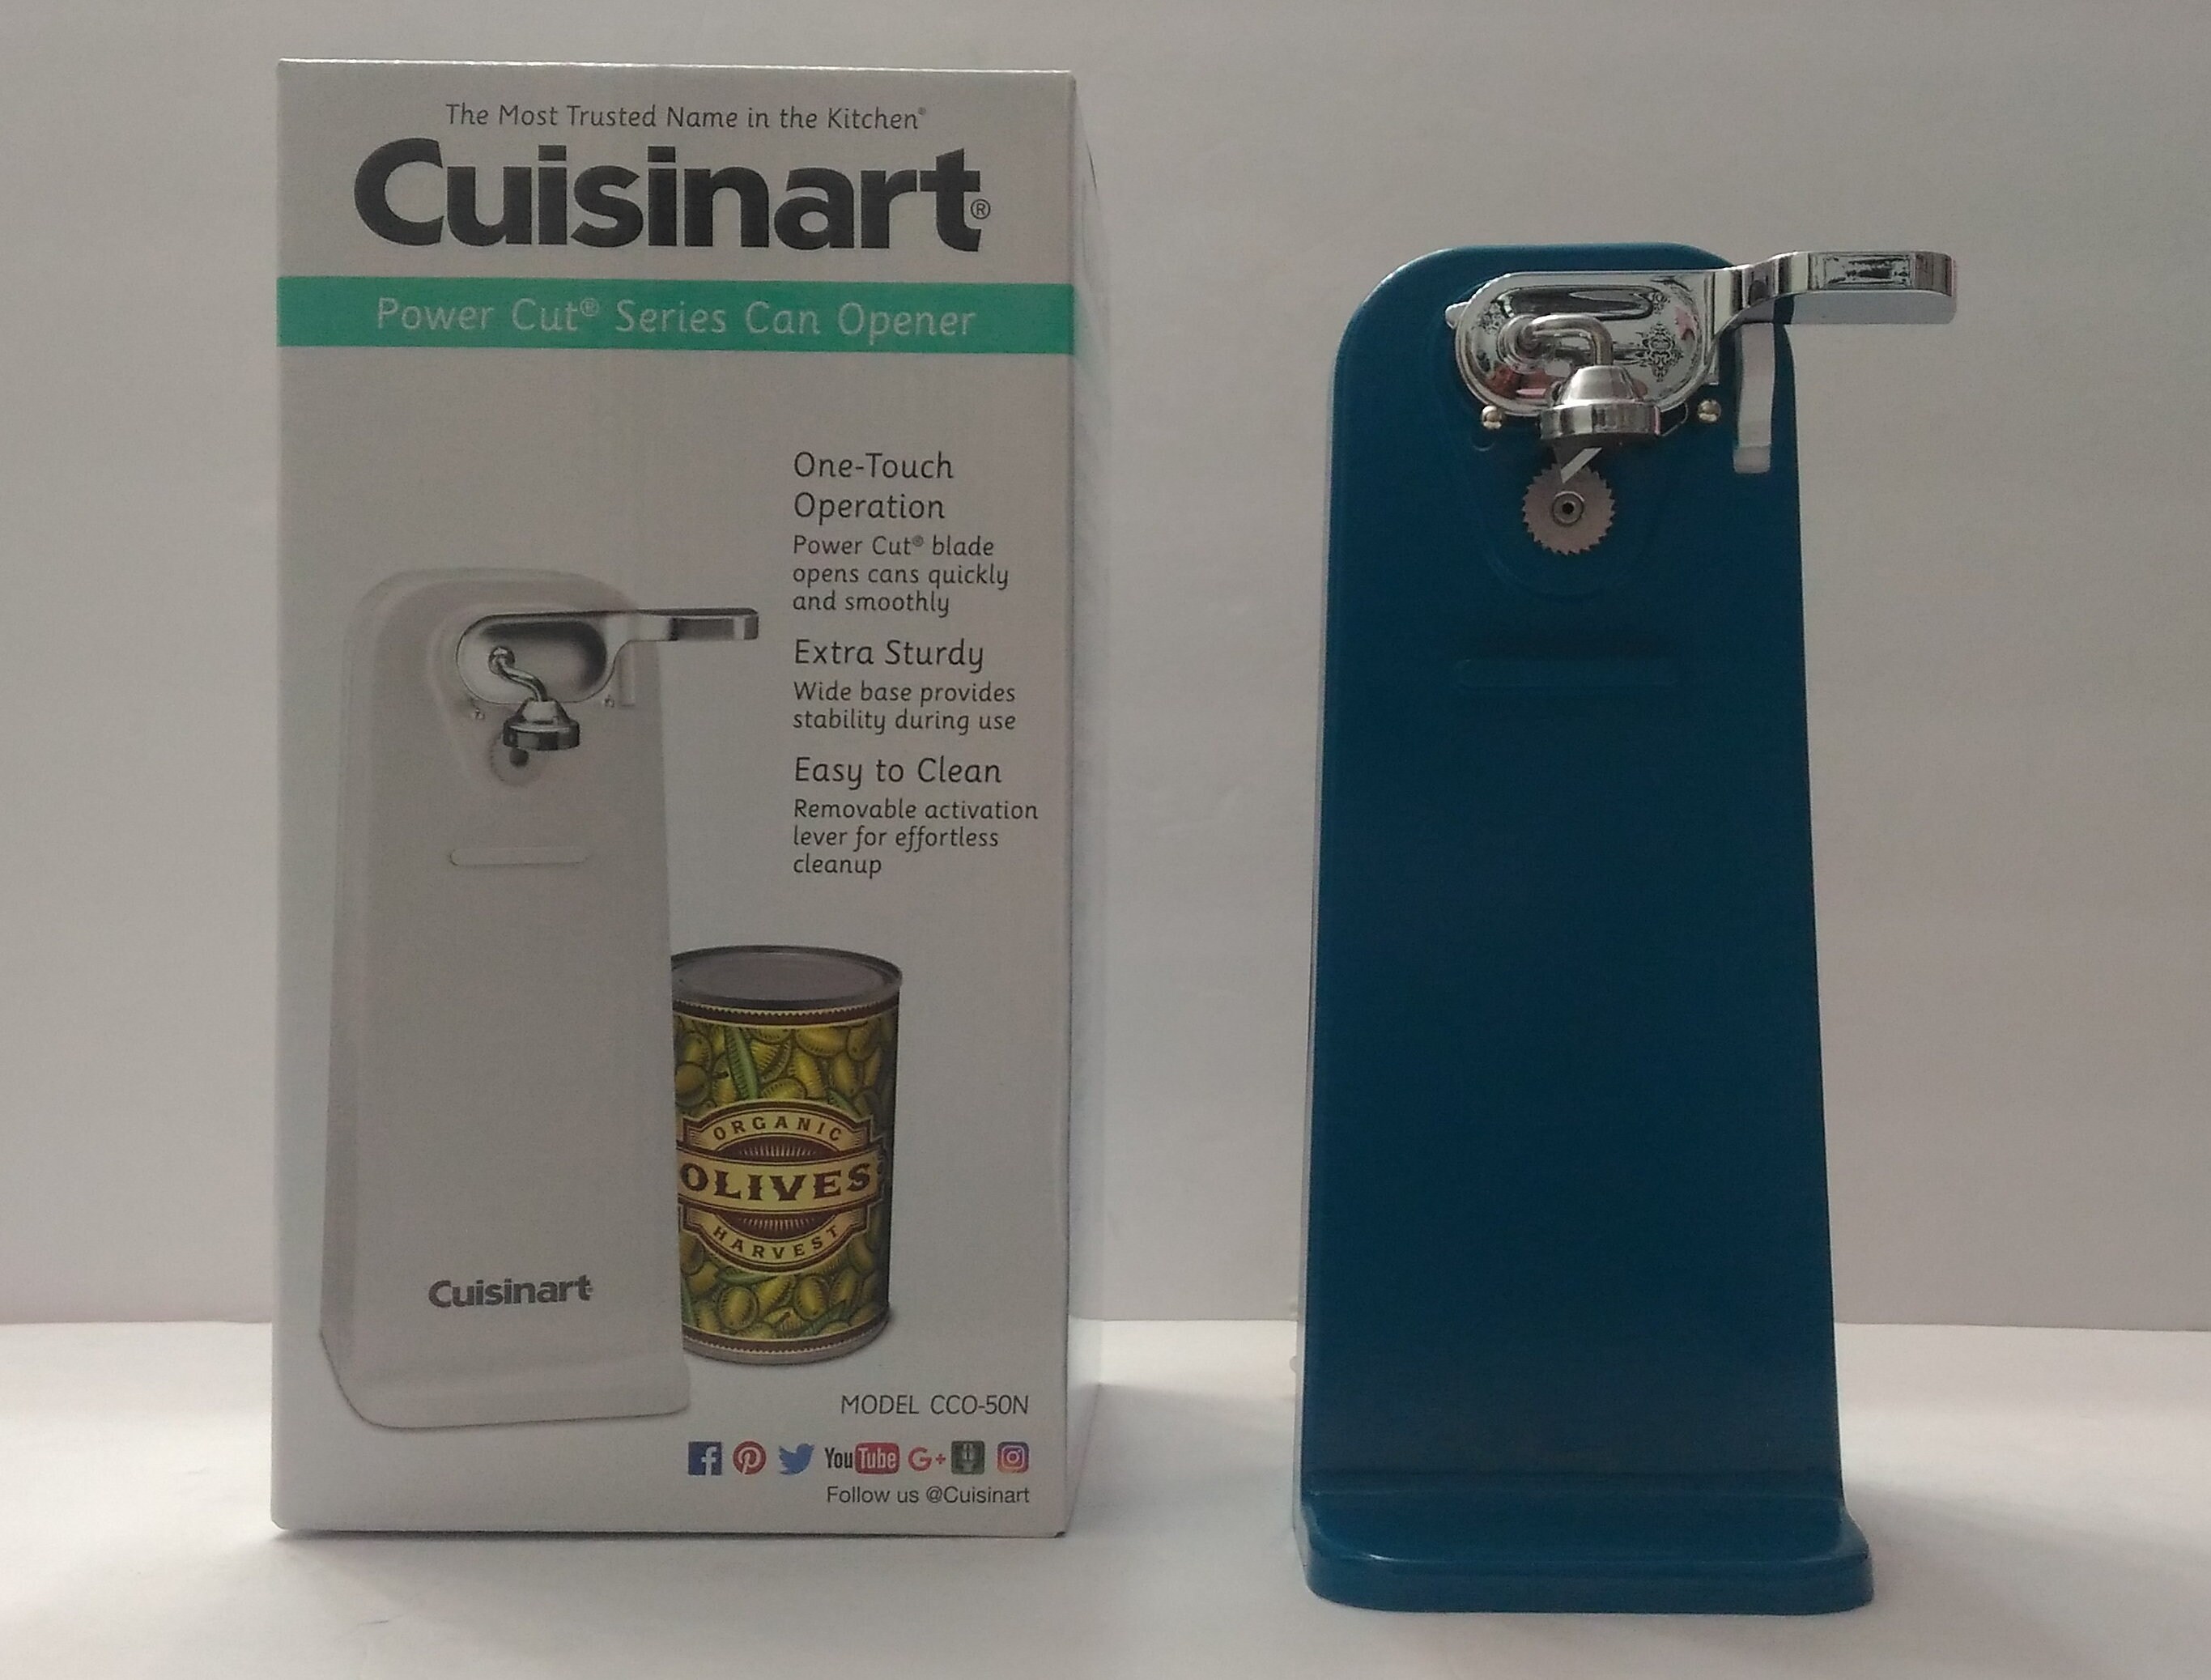 Cobalt Blue Cuisinart Deluxe Electric Can Opener ,cobalt Blue Kitchenaid  ,cobalt Blue Appliances, Heavy Duty Can Opener 